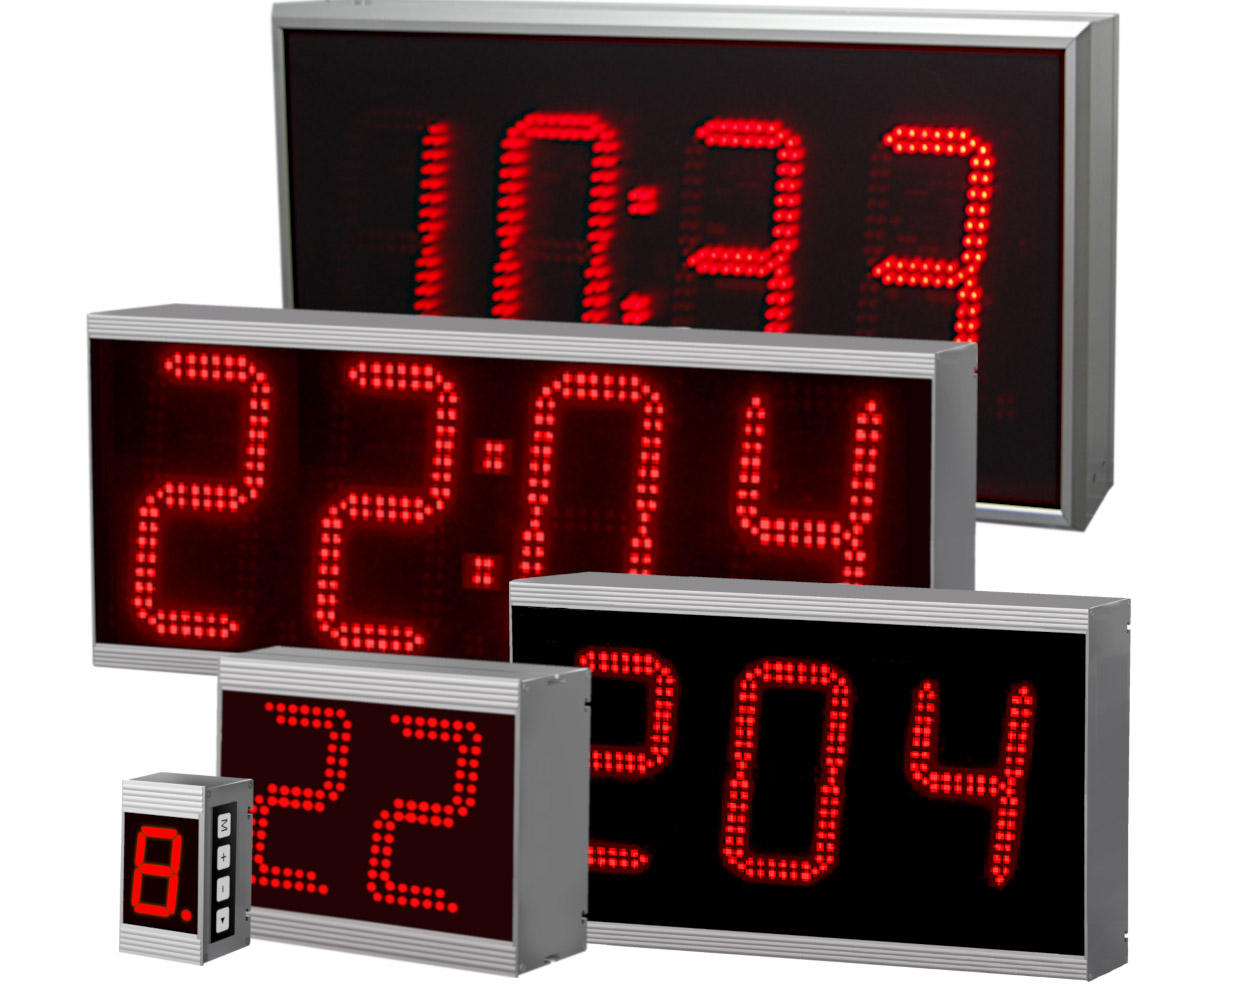 Numeric large displays, number of digits: 1 to 12 digits, dimension symbol, character sizes: 40 mm to 400 mm